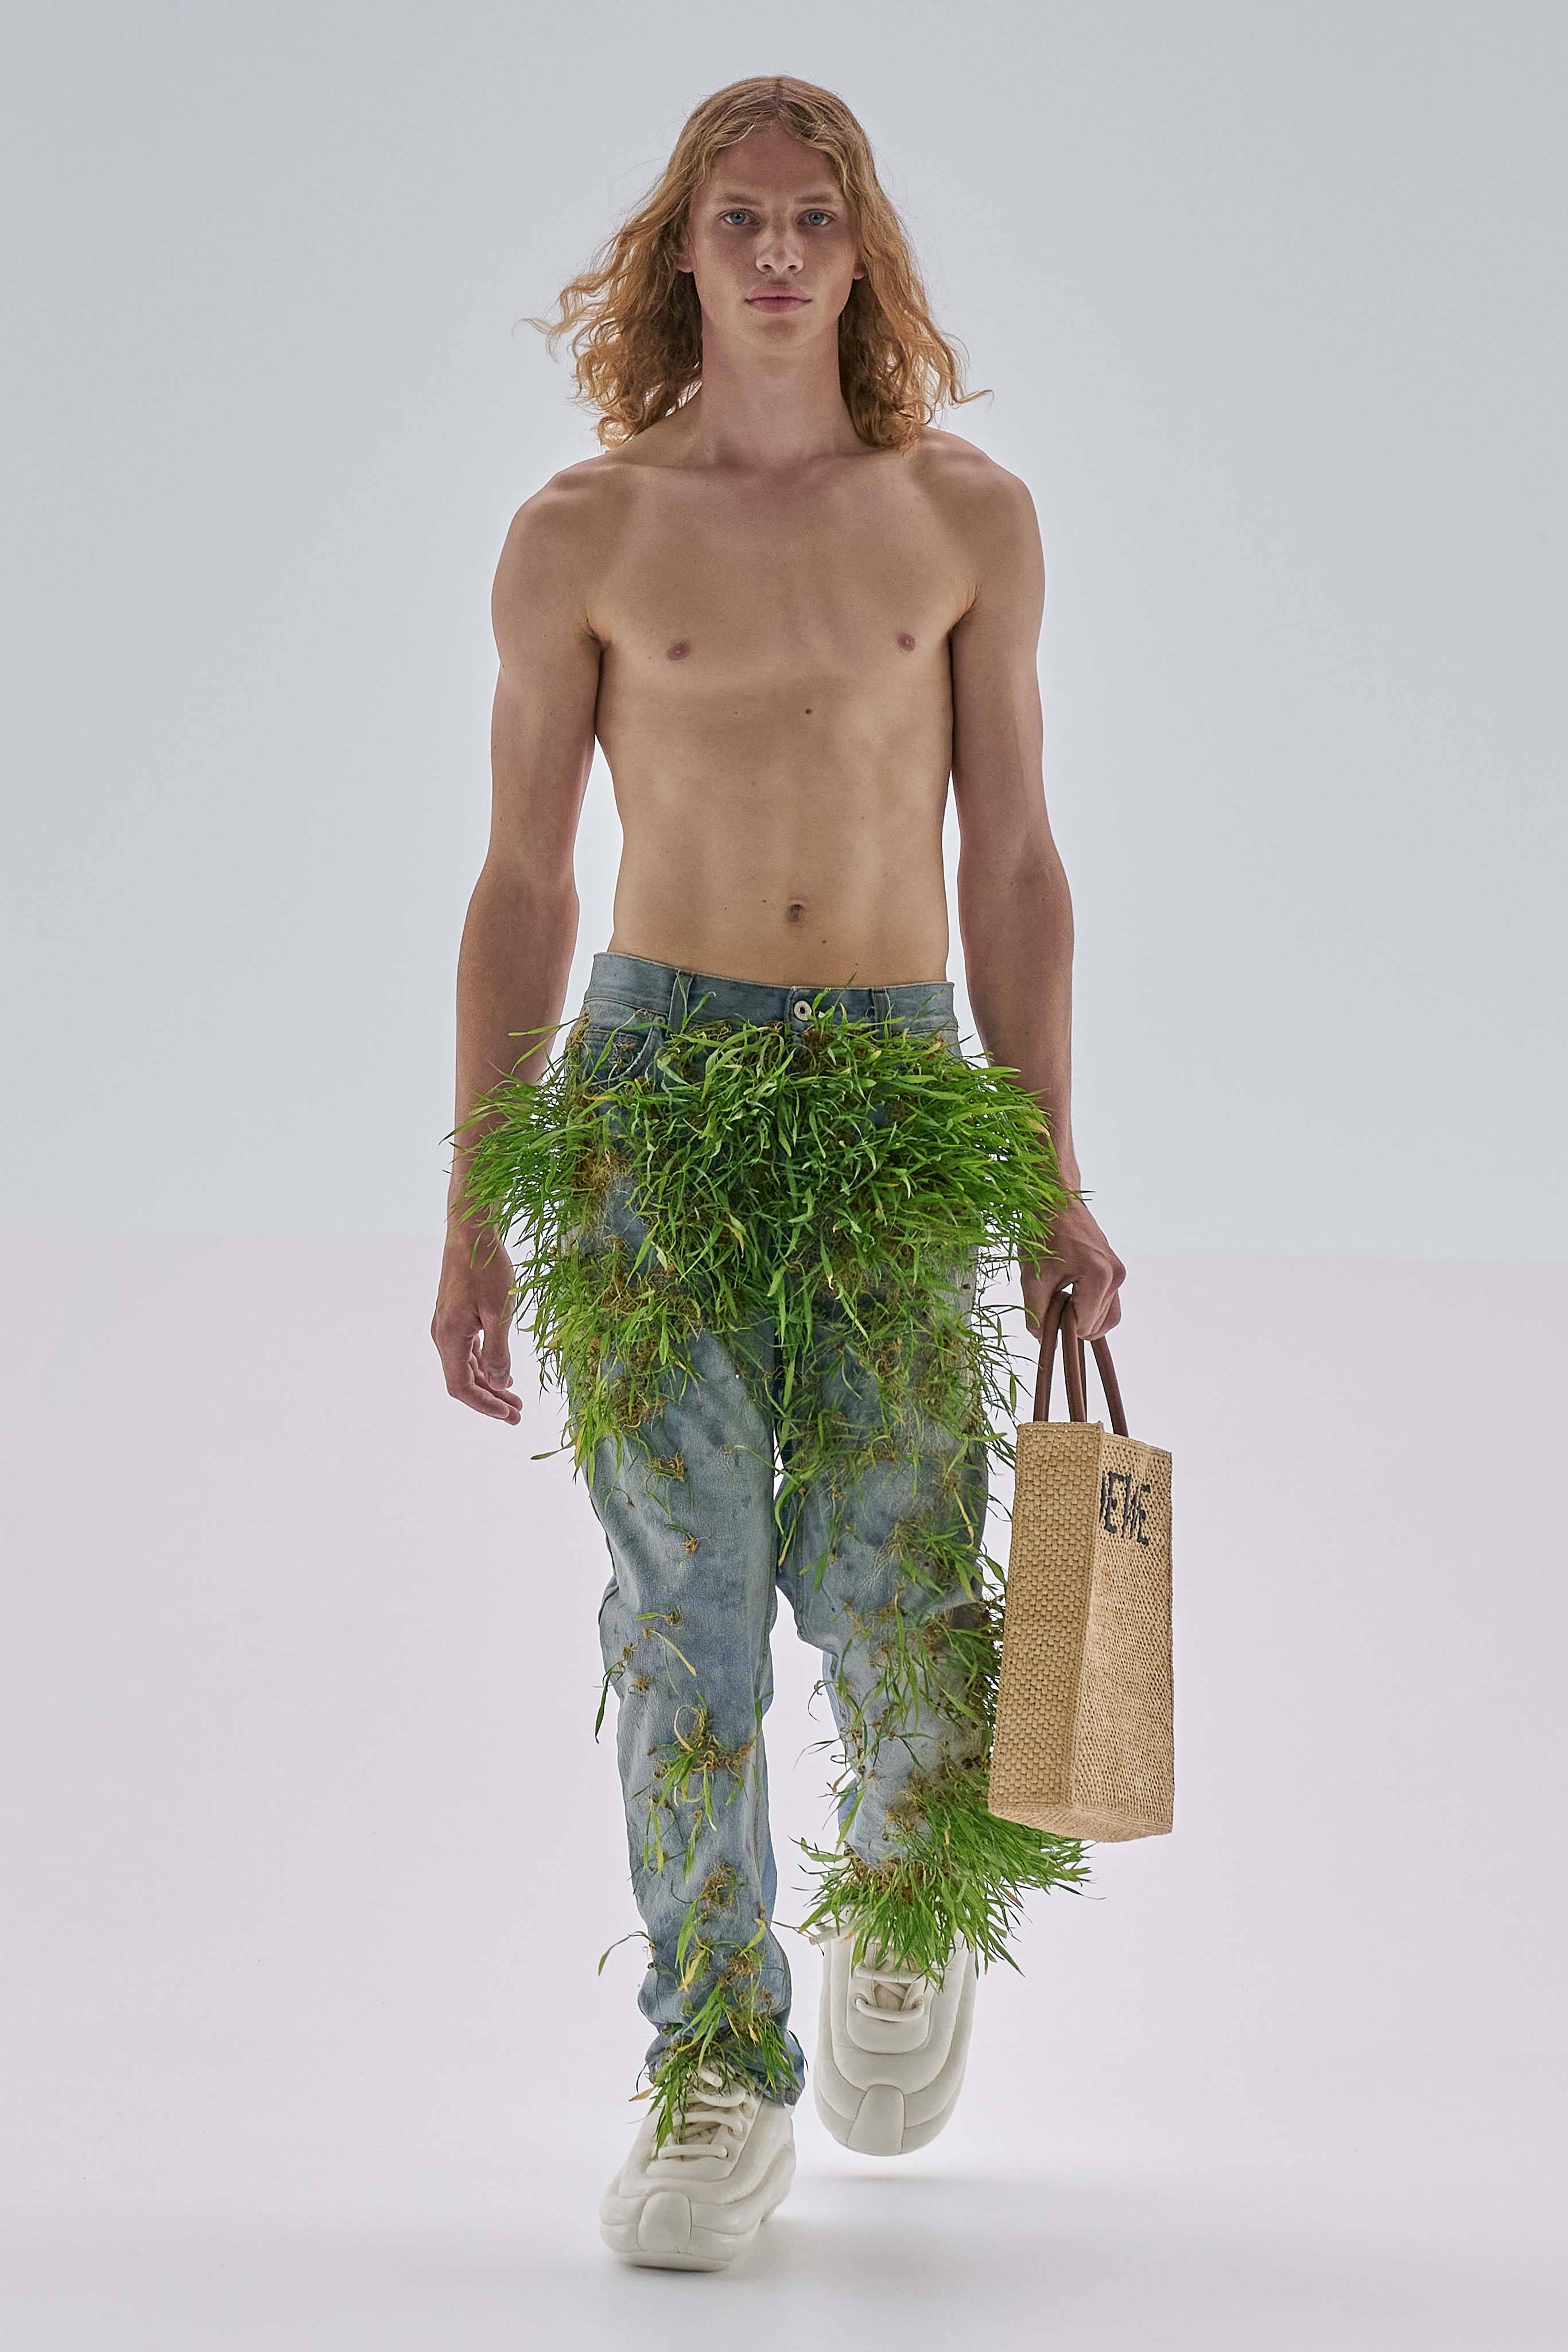 Loewe's Spring-Summer 2023 menswear collection